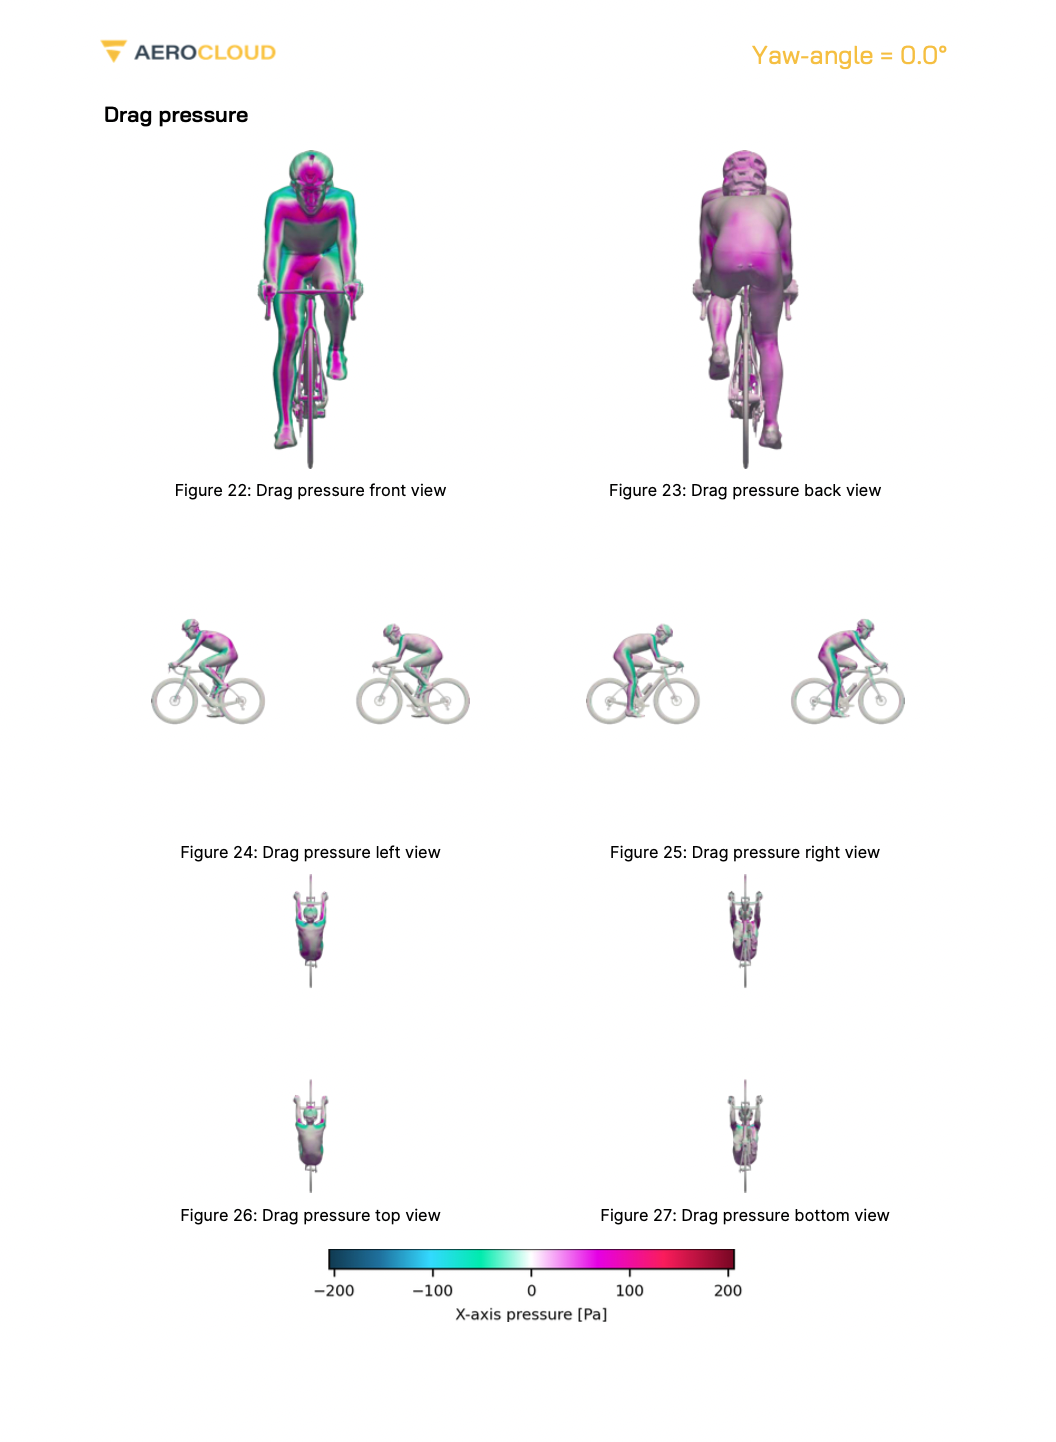 The image shows drag pressure distributions for two cyclists based on CfD results for a simulation analysing the drag experienced by a following rider